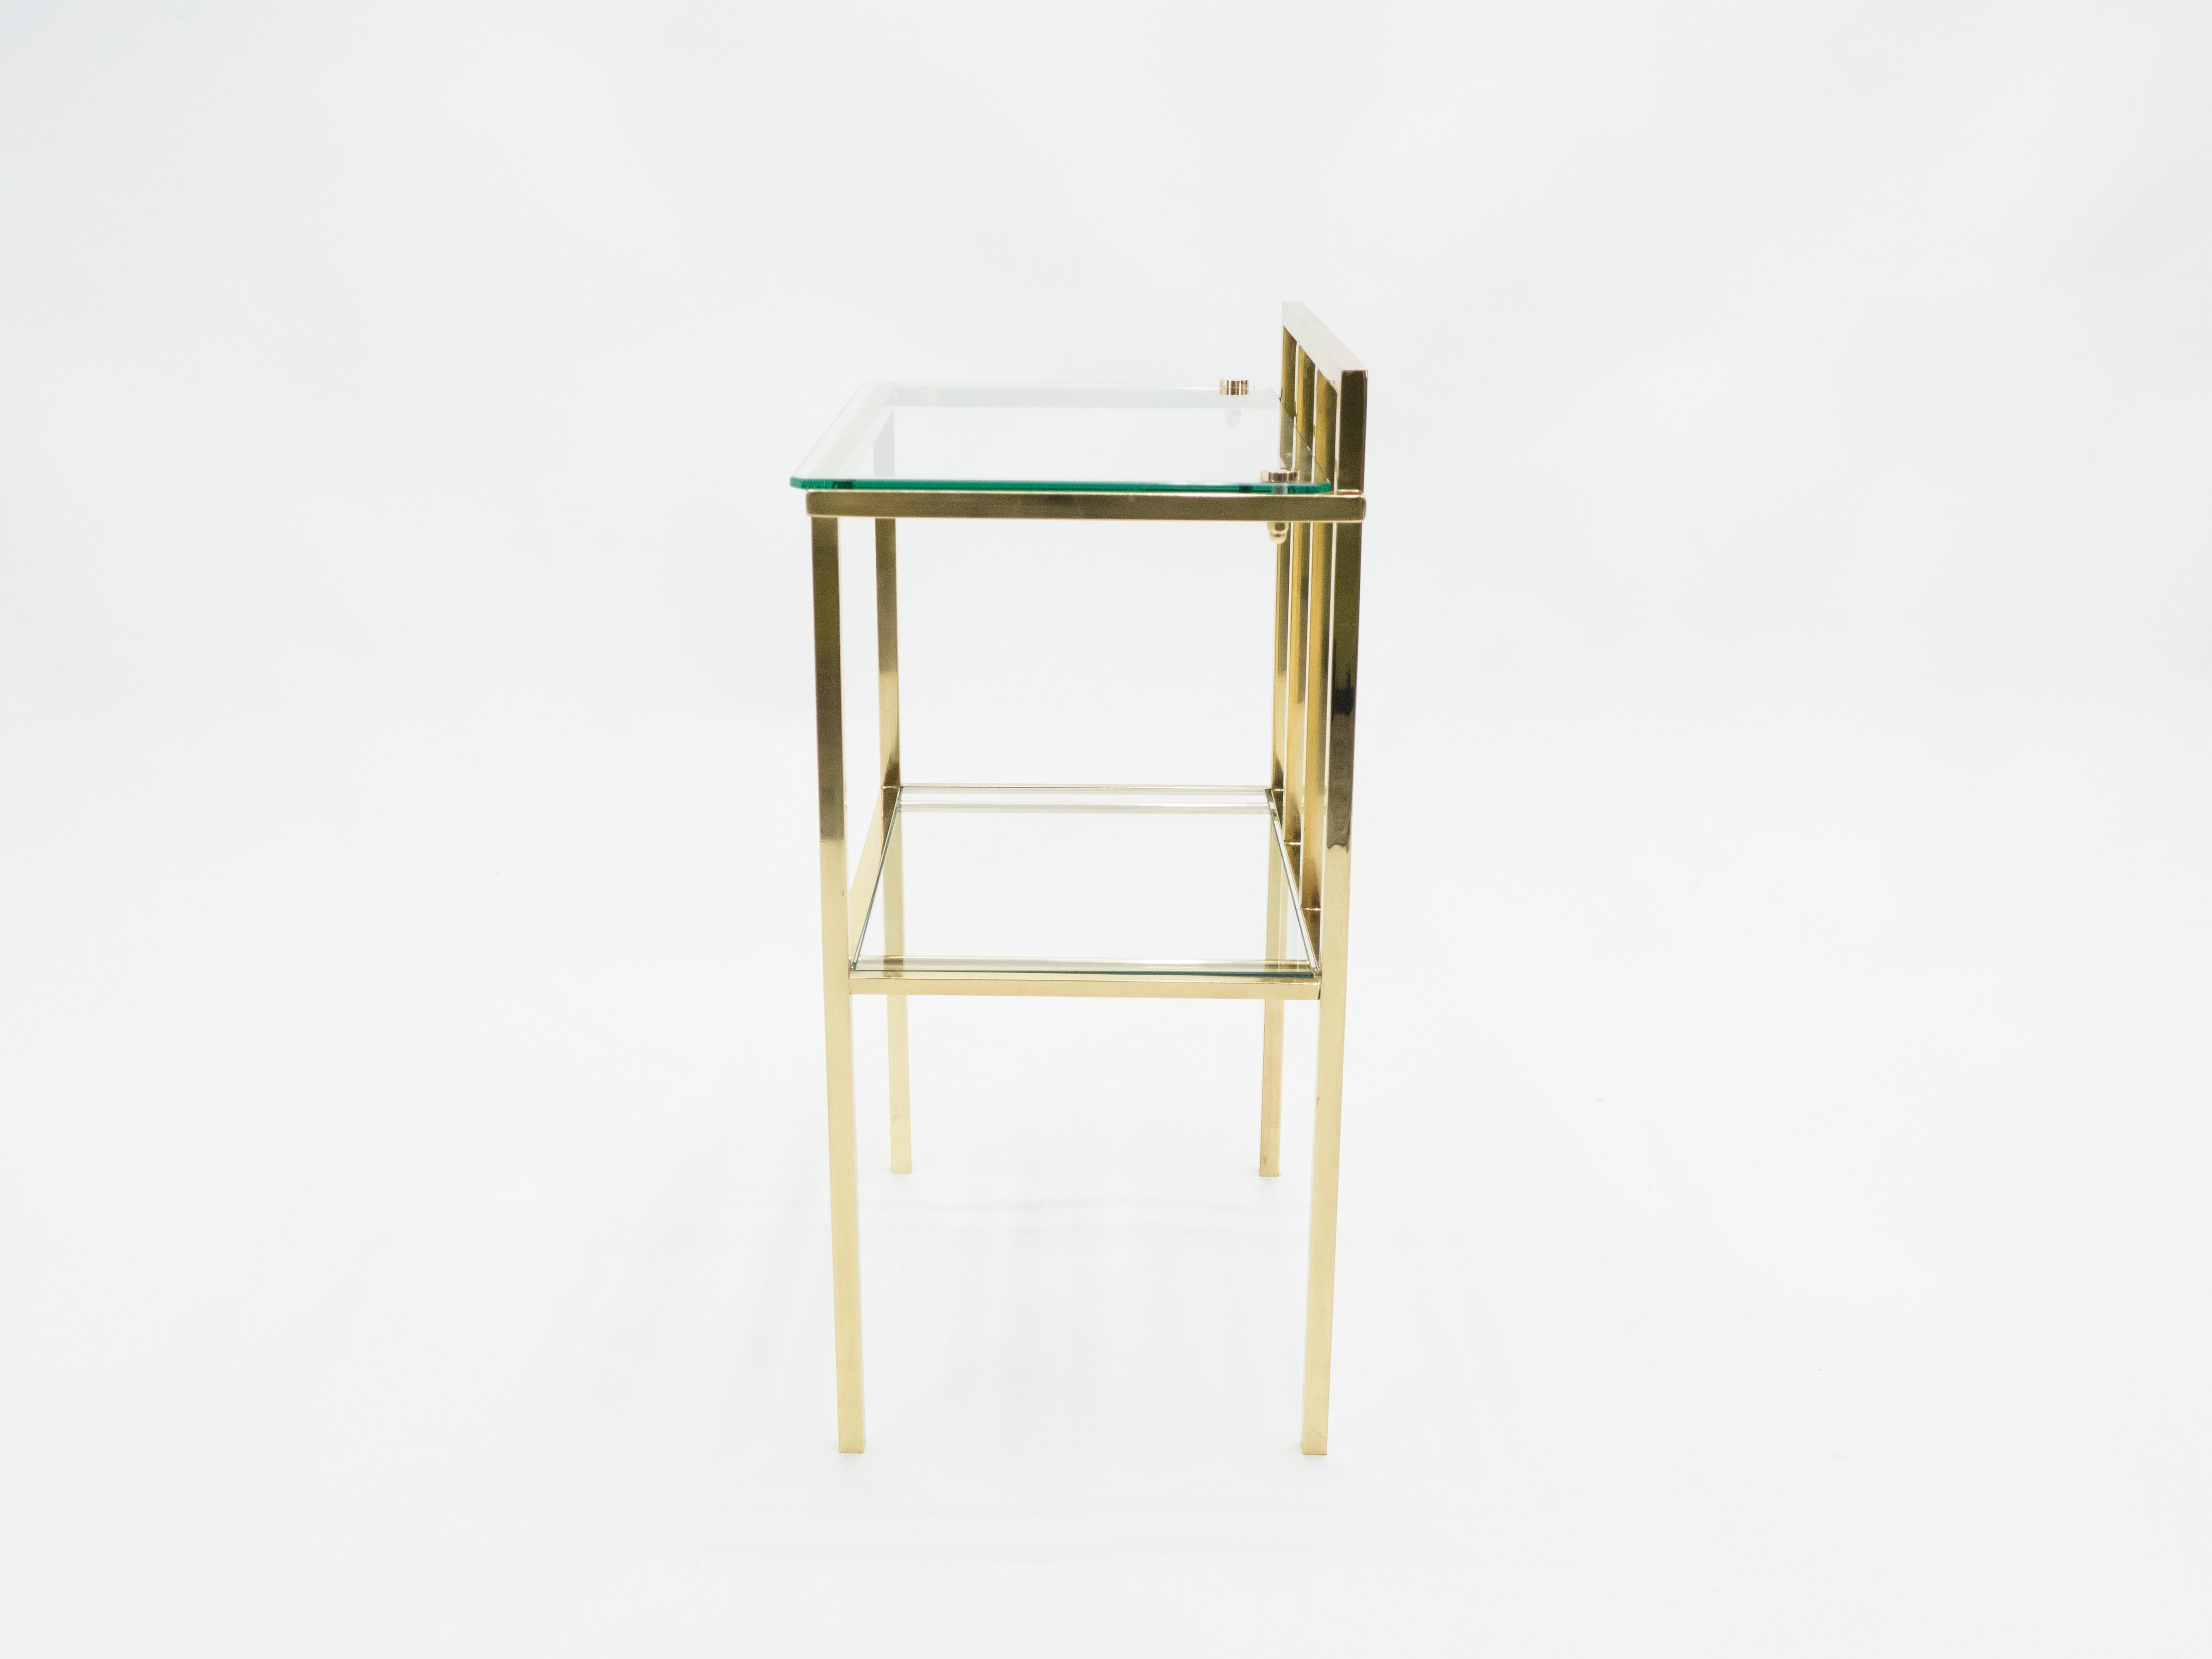 French Brass Two-Tier Glass End Tables Attributed to Marc du Plantier, 1960s For Sale 4